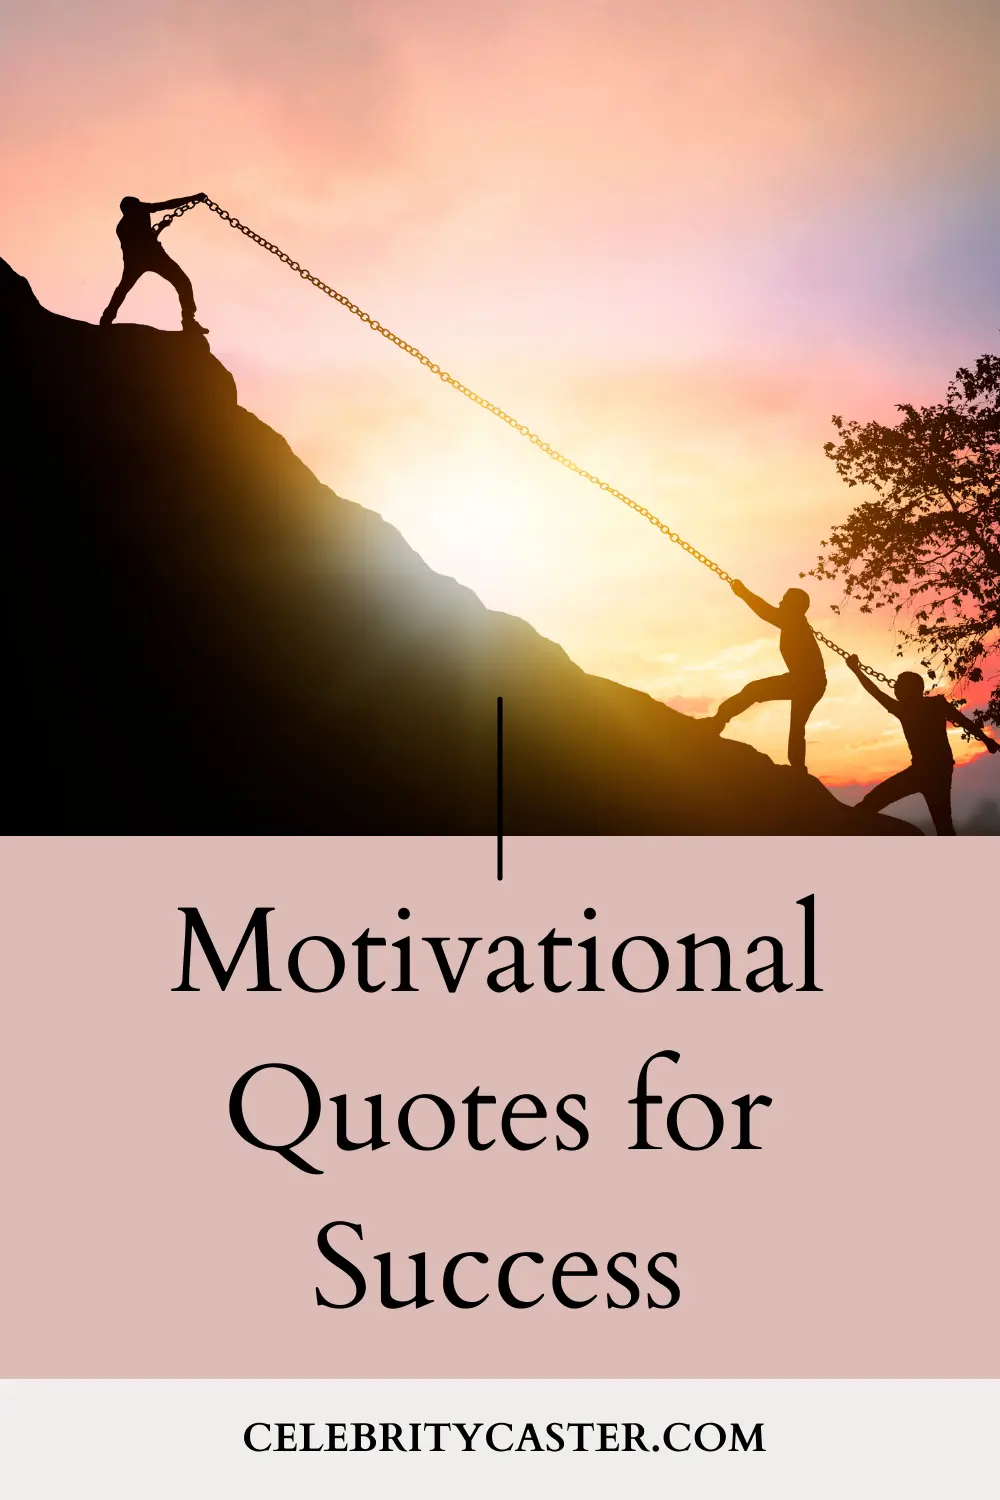 100 Motivational Quotes for Success 1